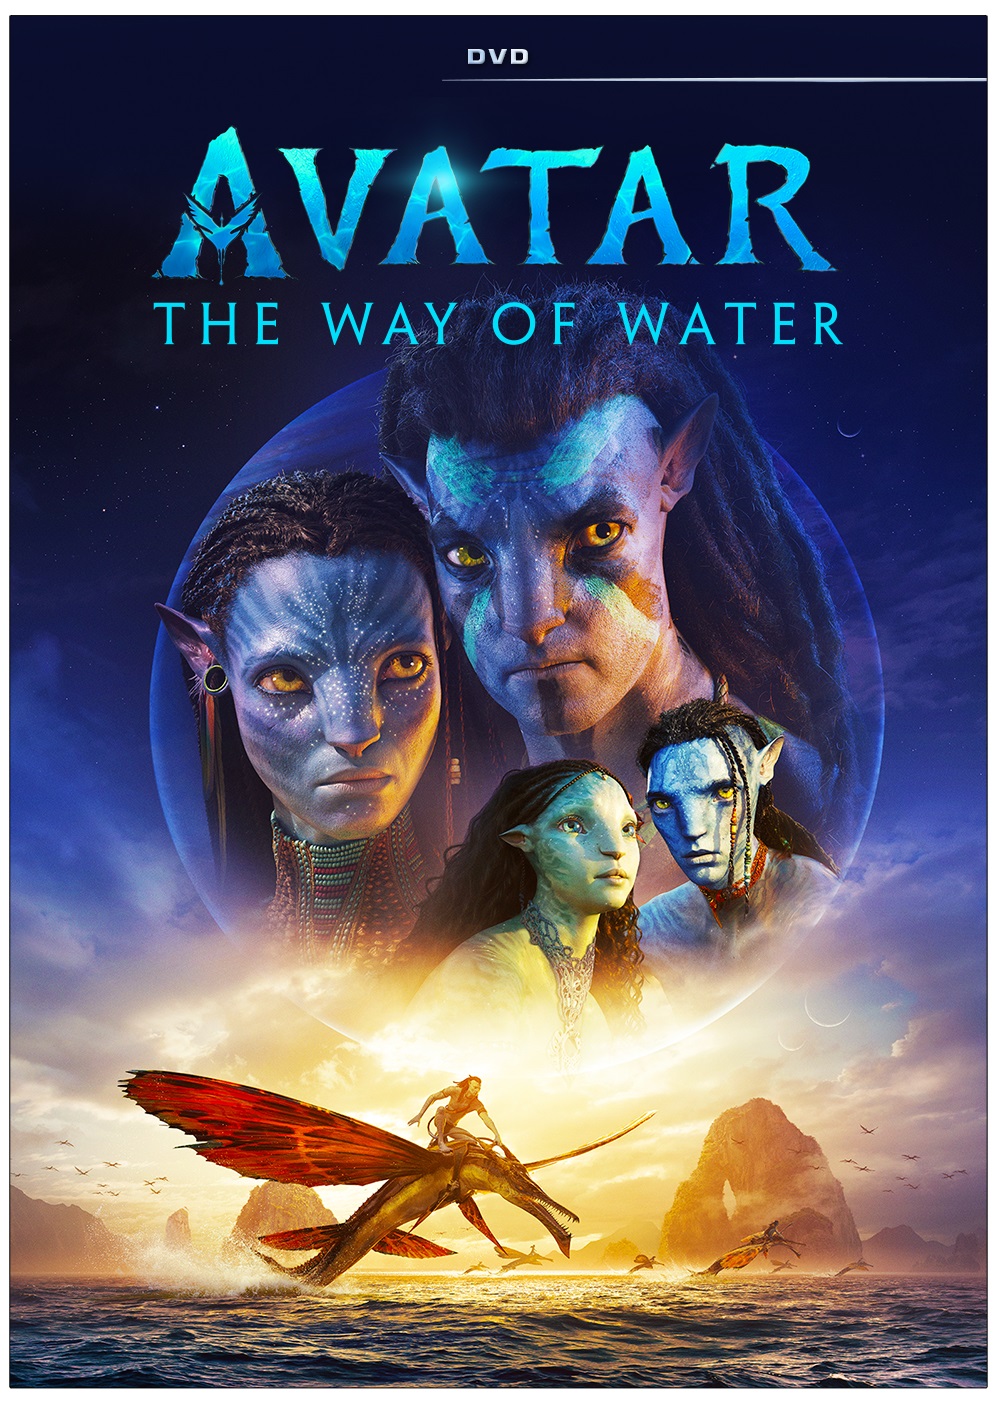 Avatar: The Way of Water (DVD) - image 1 of 3